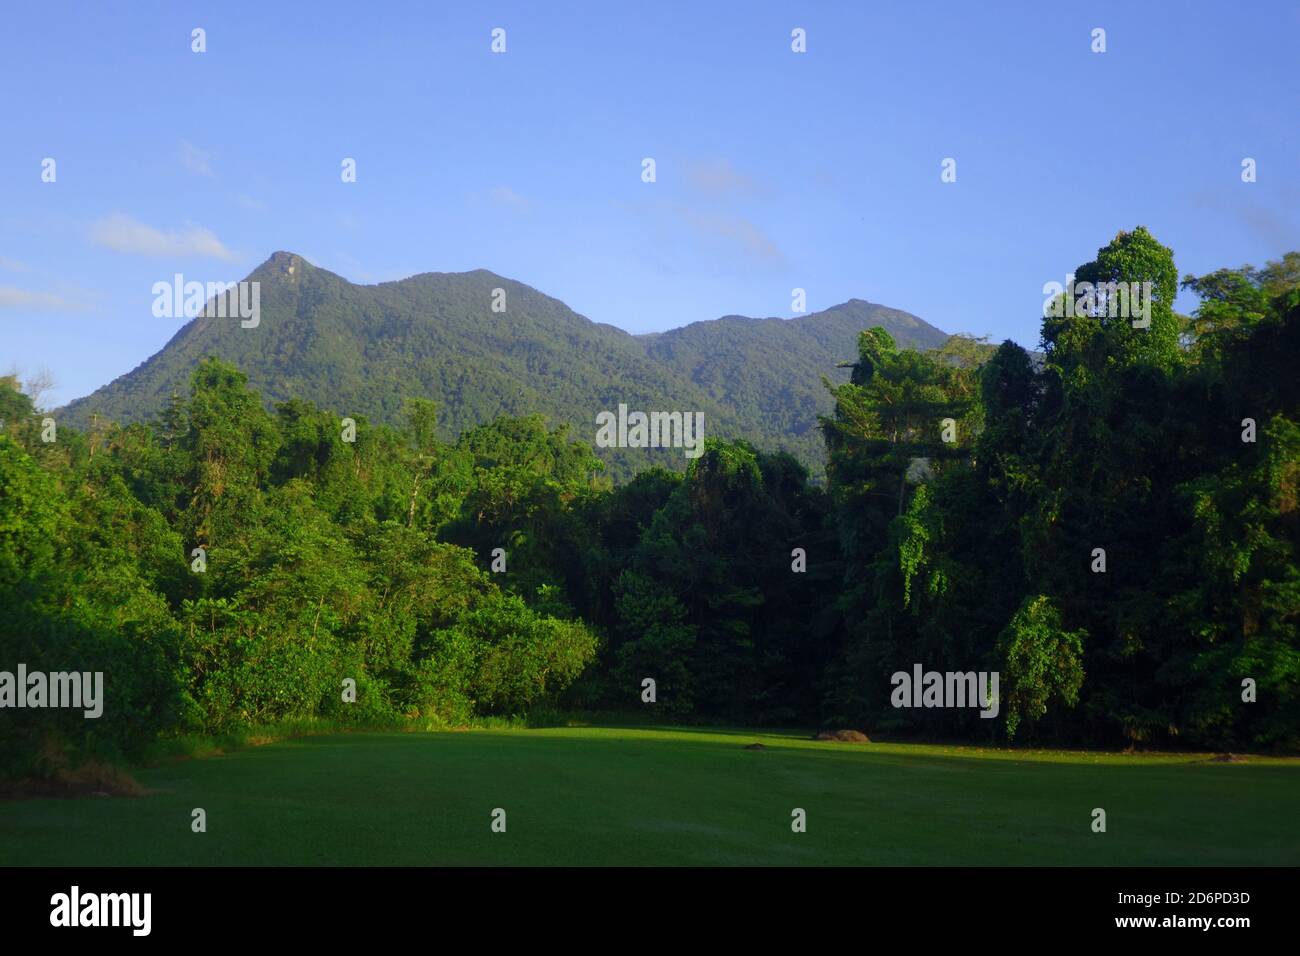 Clear dawn view of Broken Nose on Mt Bartle Frere, from Golden Hole, Wet Tropics, near Cairns, Queensland, Australia Stock Photo